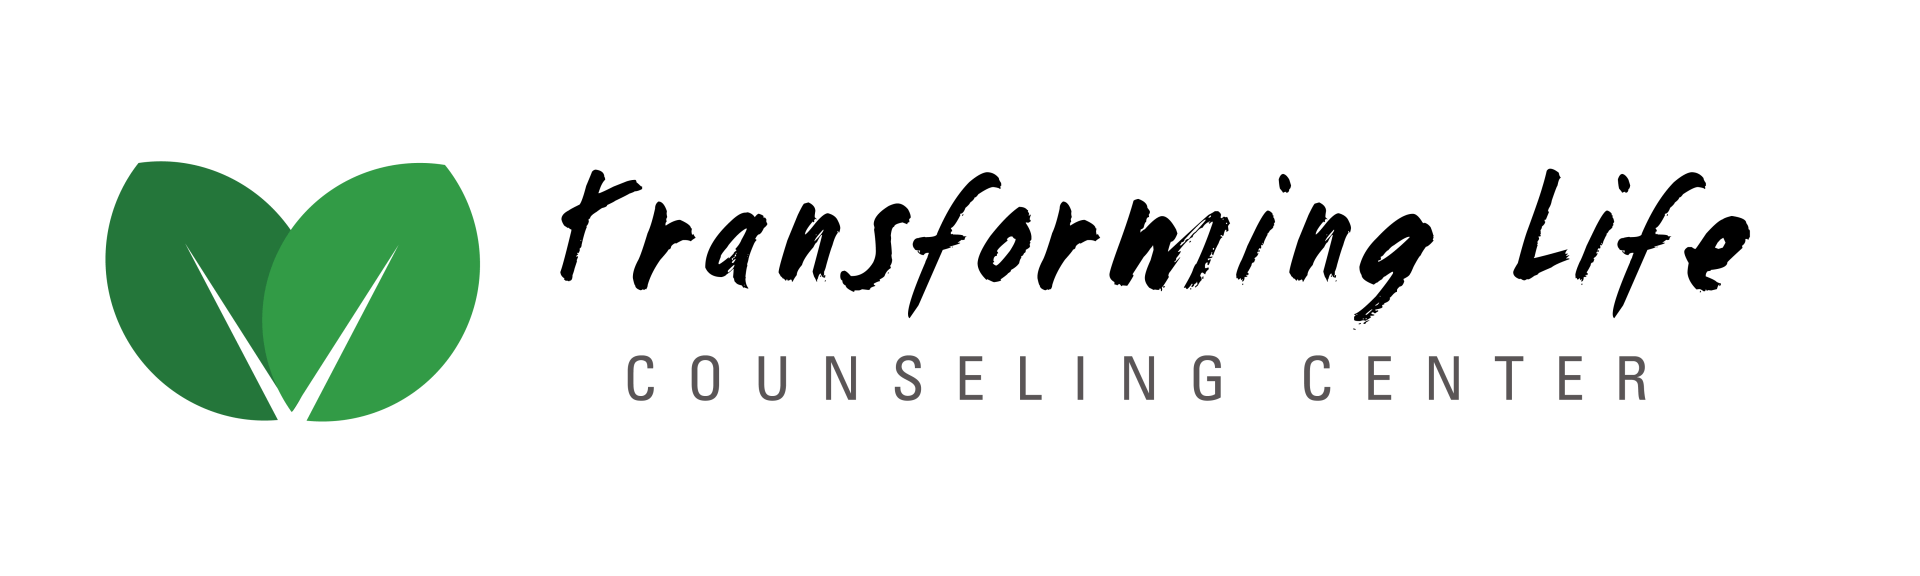 new life counseling services llc